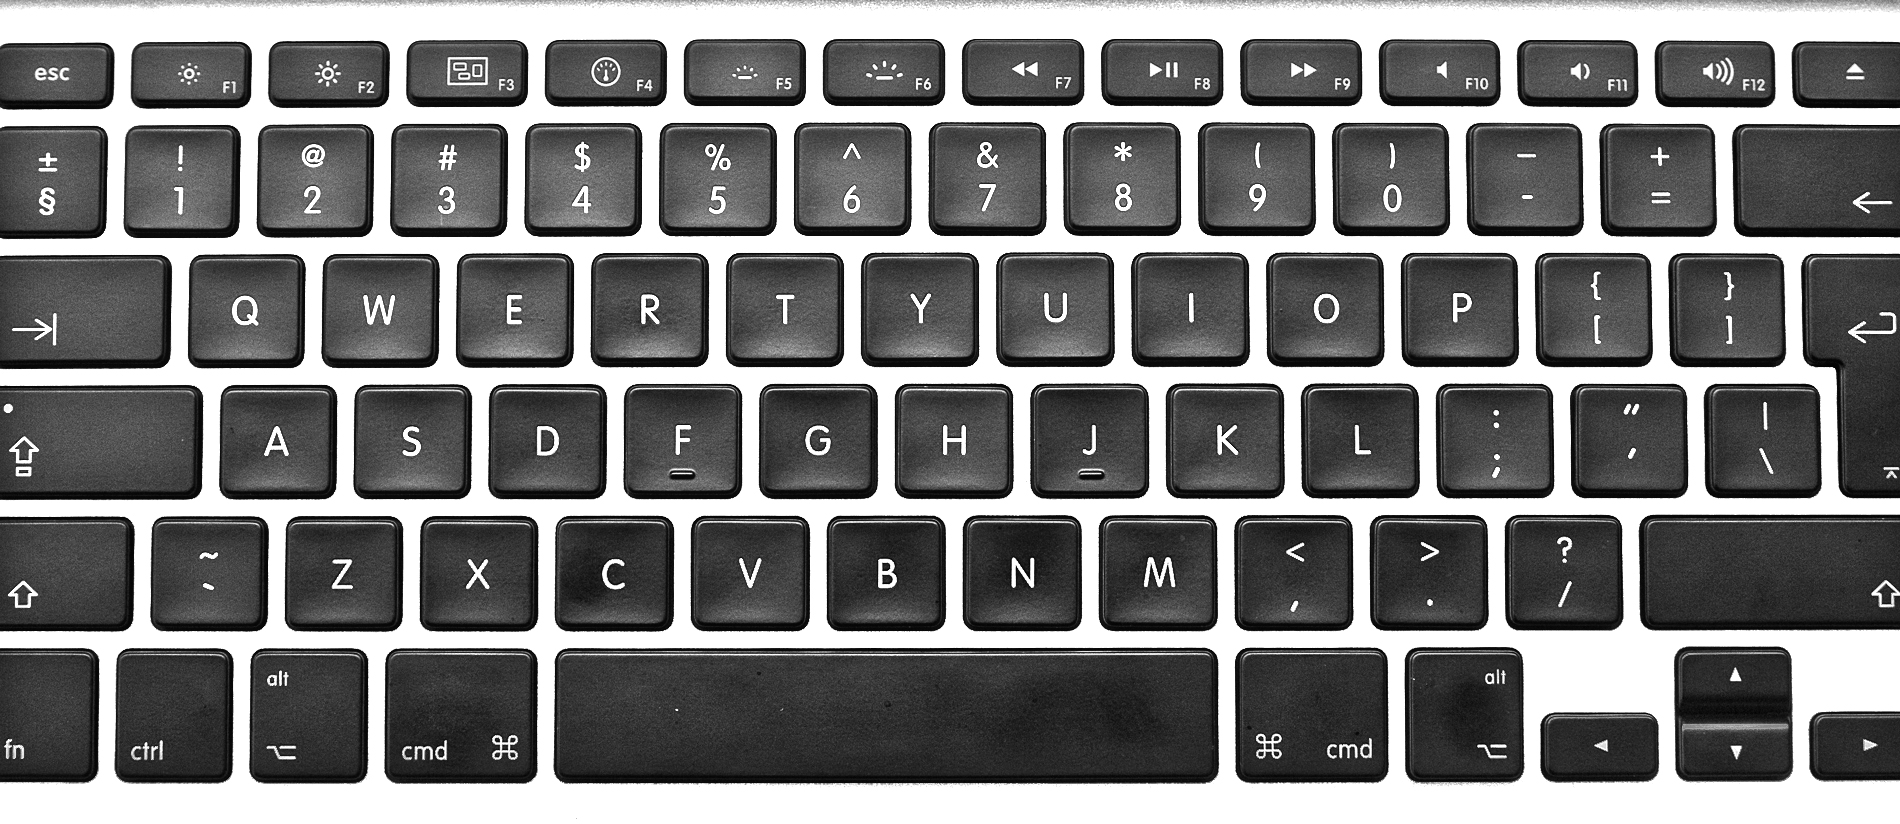 keyboard clipart images - photo #36